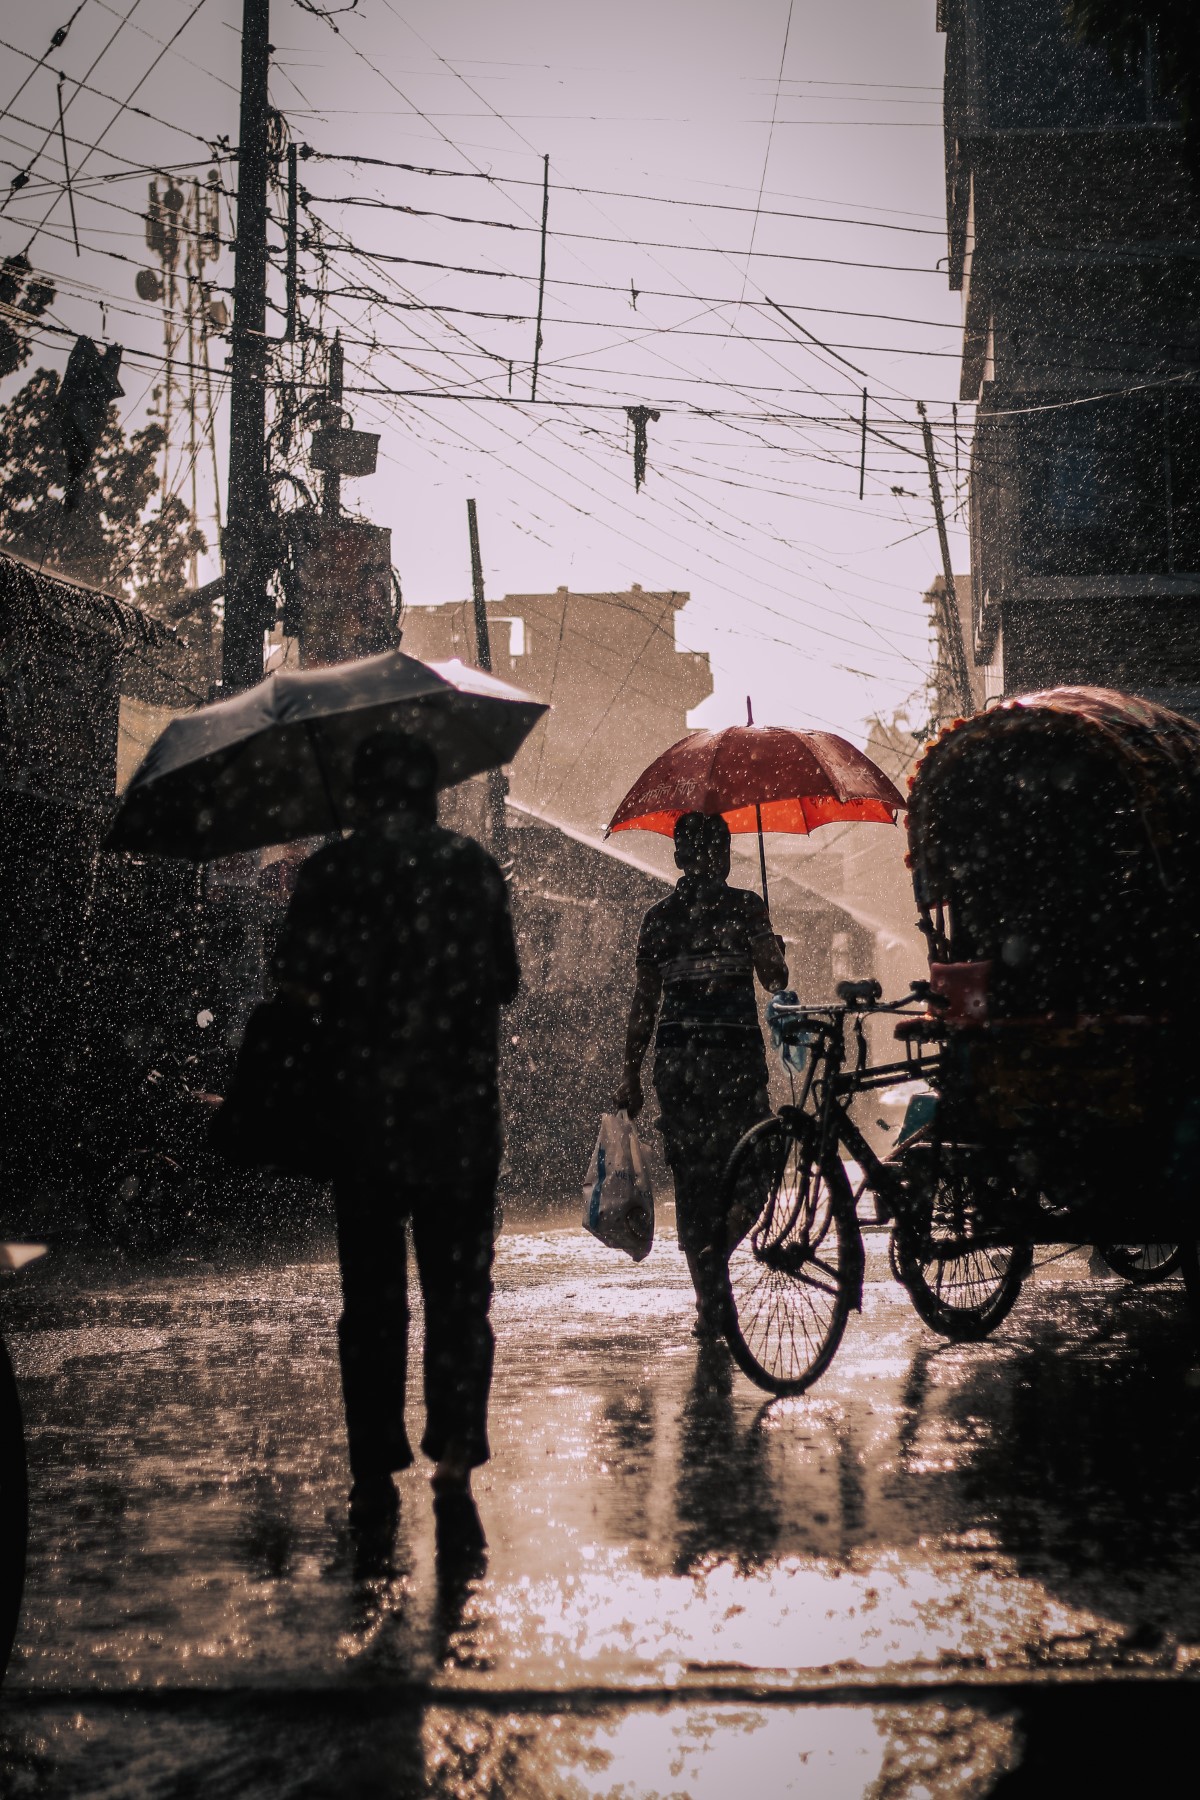 A full portrait shot of monsoon season, featuring people holding umbrellas on the street under a sepia light